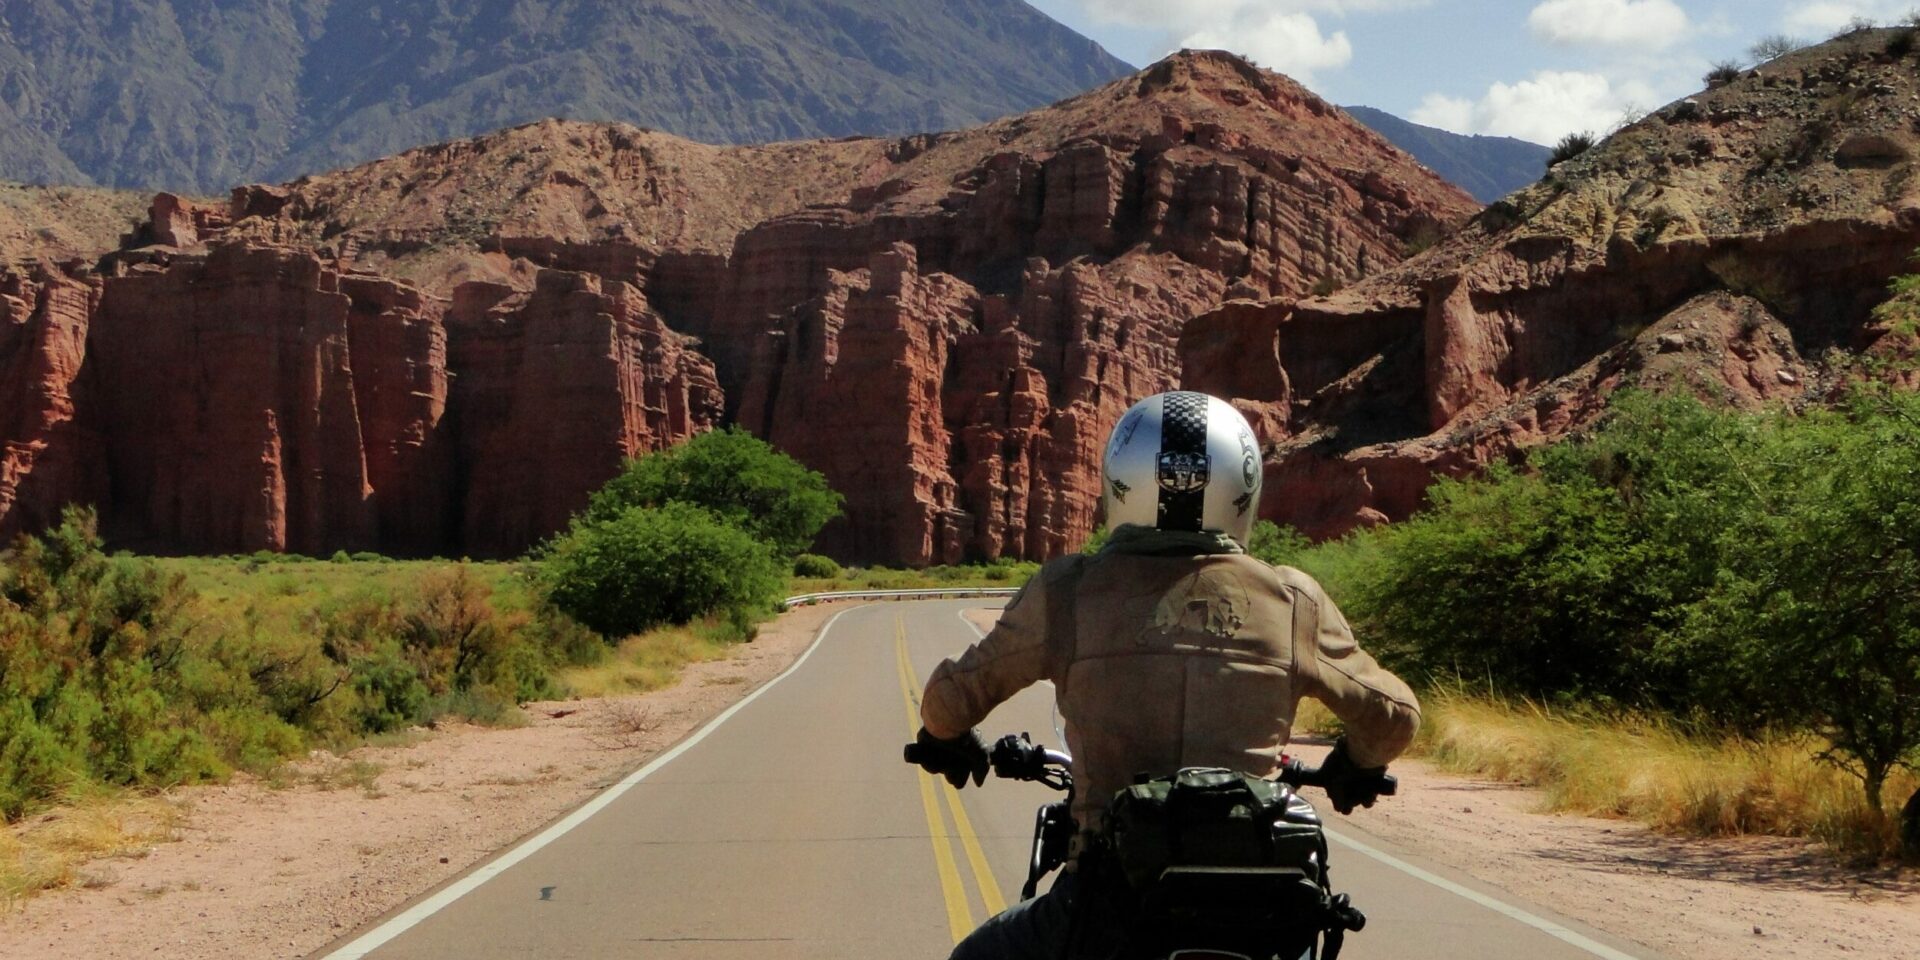 Motorcycle road trip Argentina - The mythical land of the Gauchos